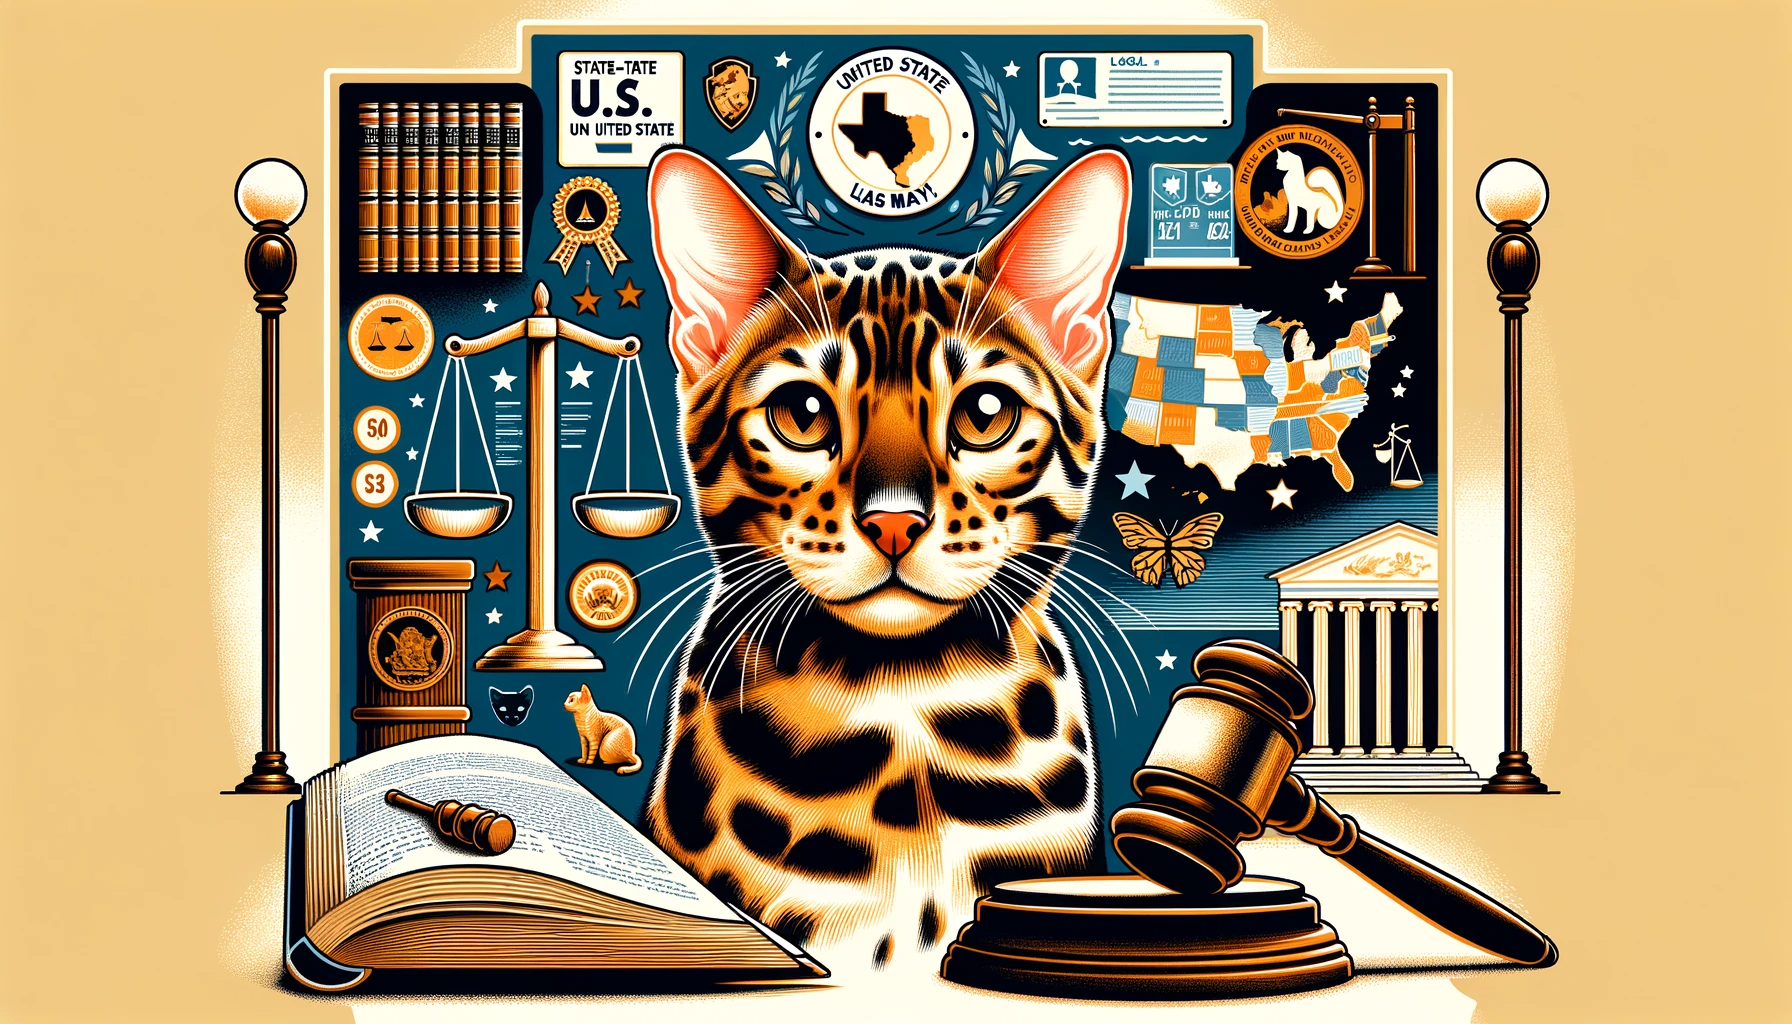 Why are Bengal Cats illegal